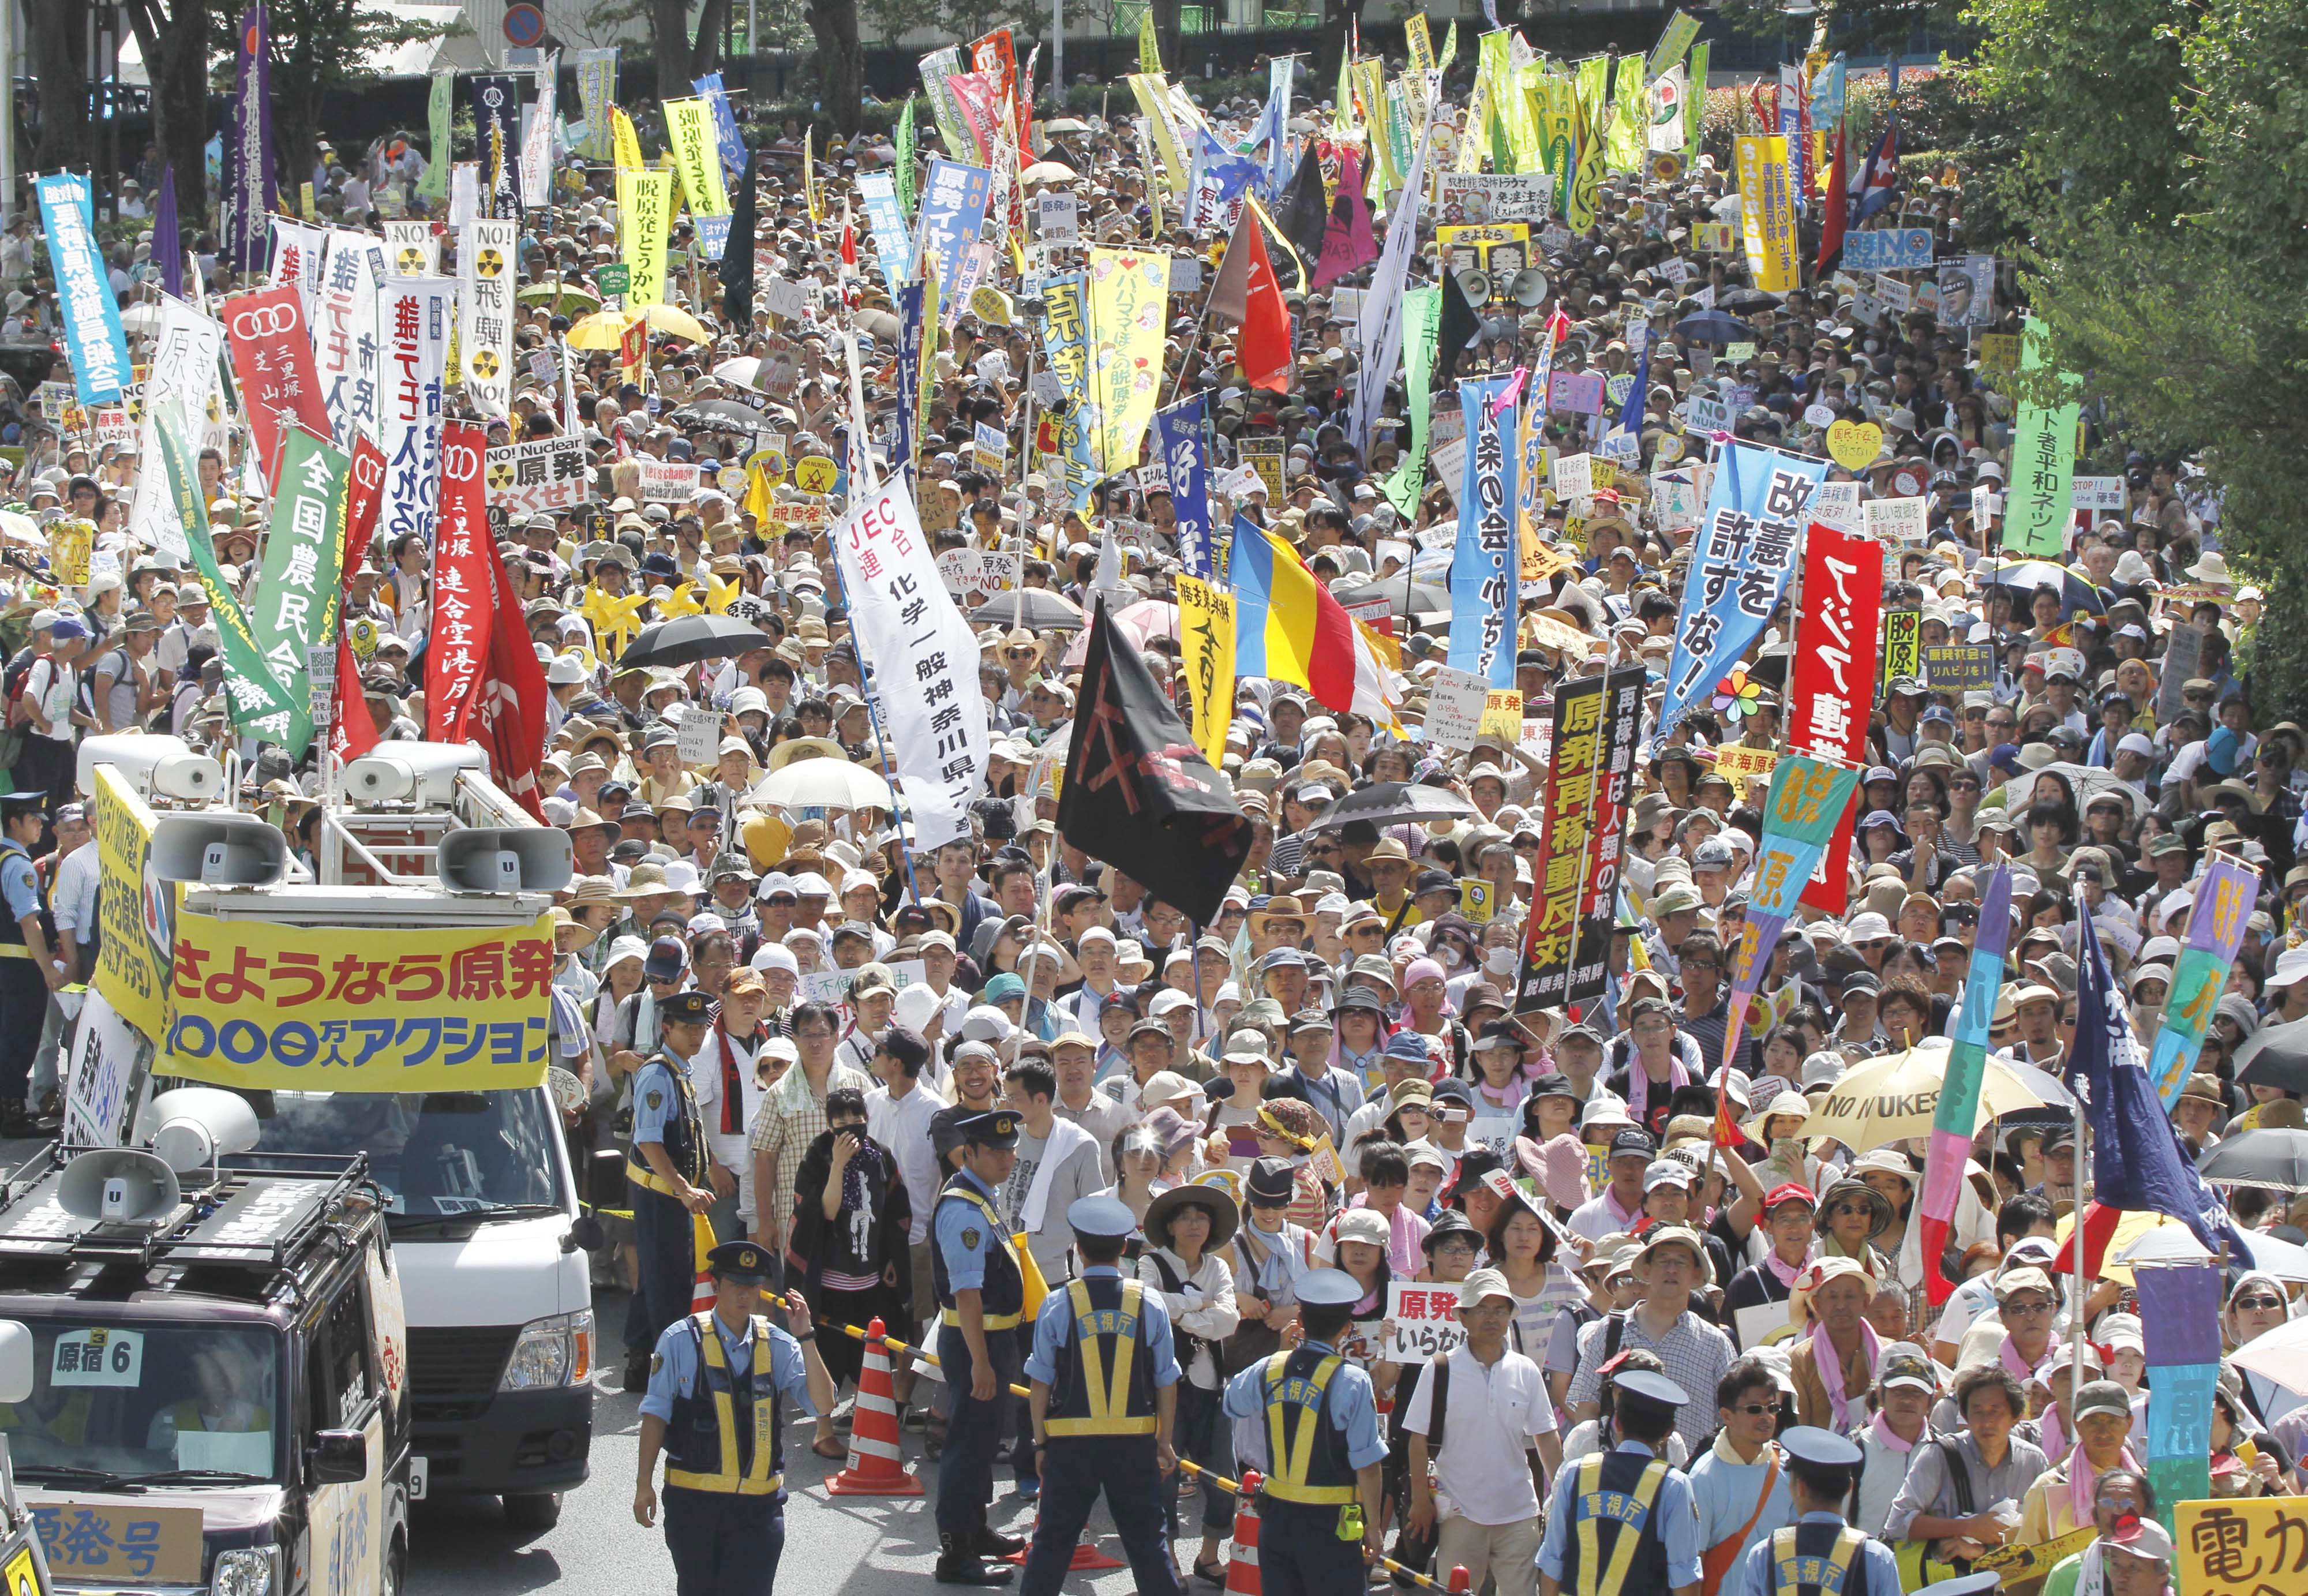 Anti-nuclear protest in Yoyogi Park in Tokyo in July 2012. The Japanese anti-nuclear movement in summer of 2012, one year after the Fukushima disaster, saw tens of thousands protest in the largest set of demonstrations that Japan had seen since the 1960s.